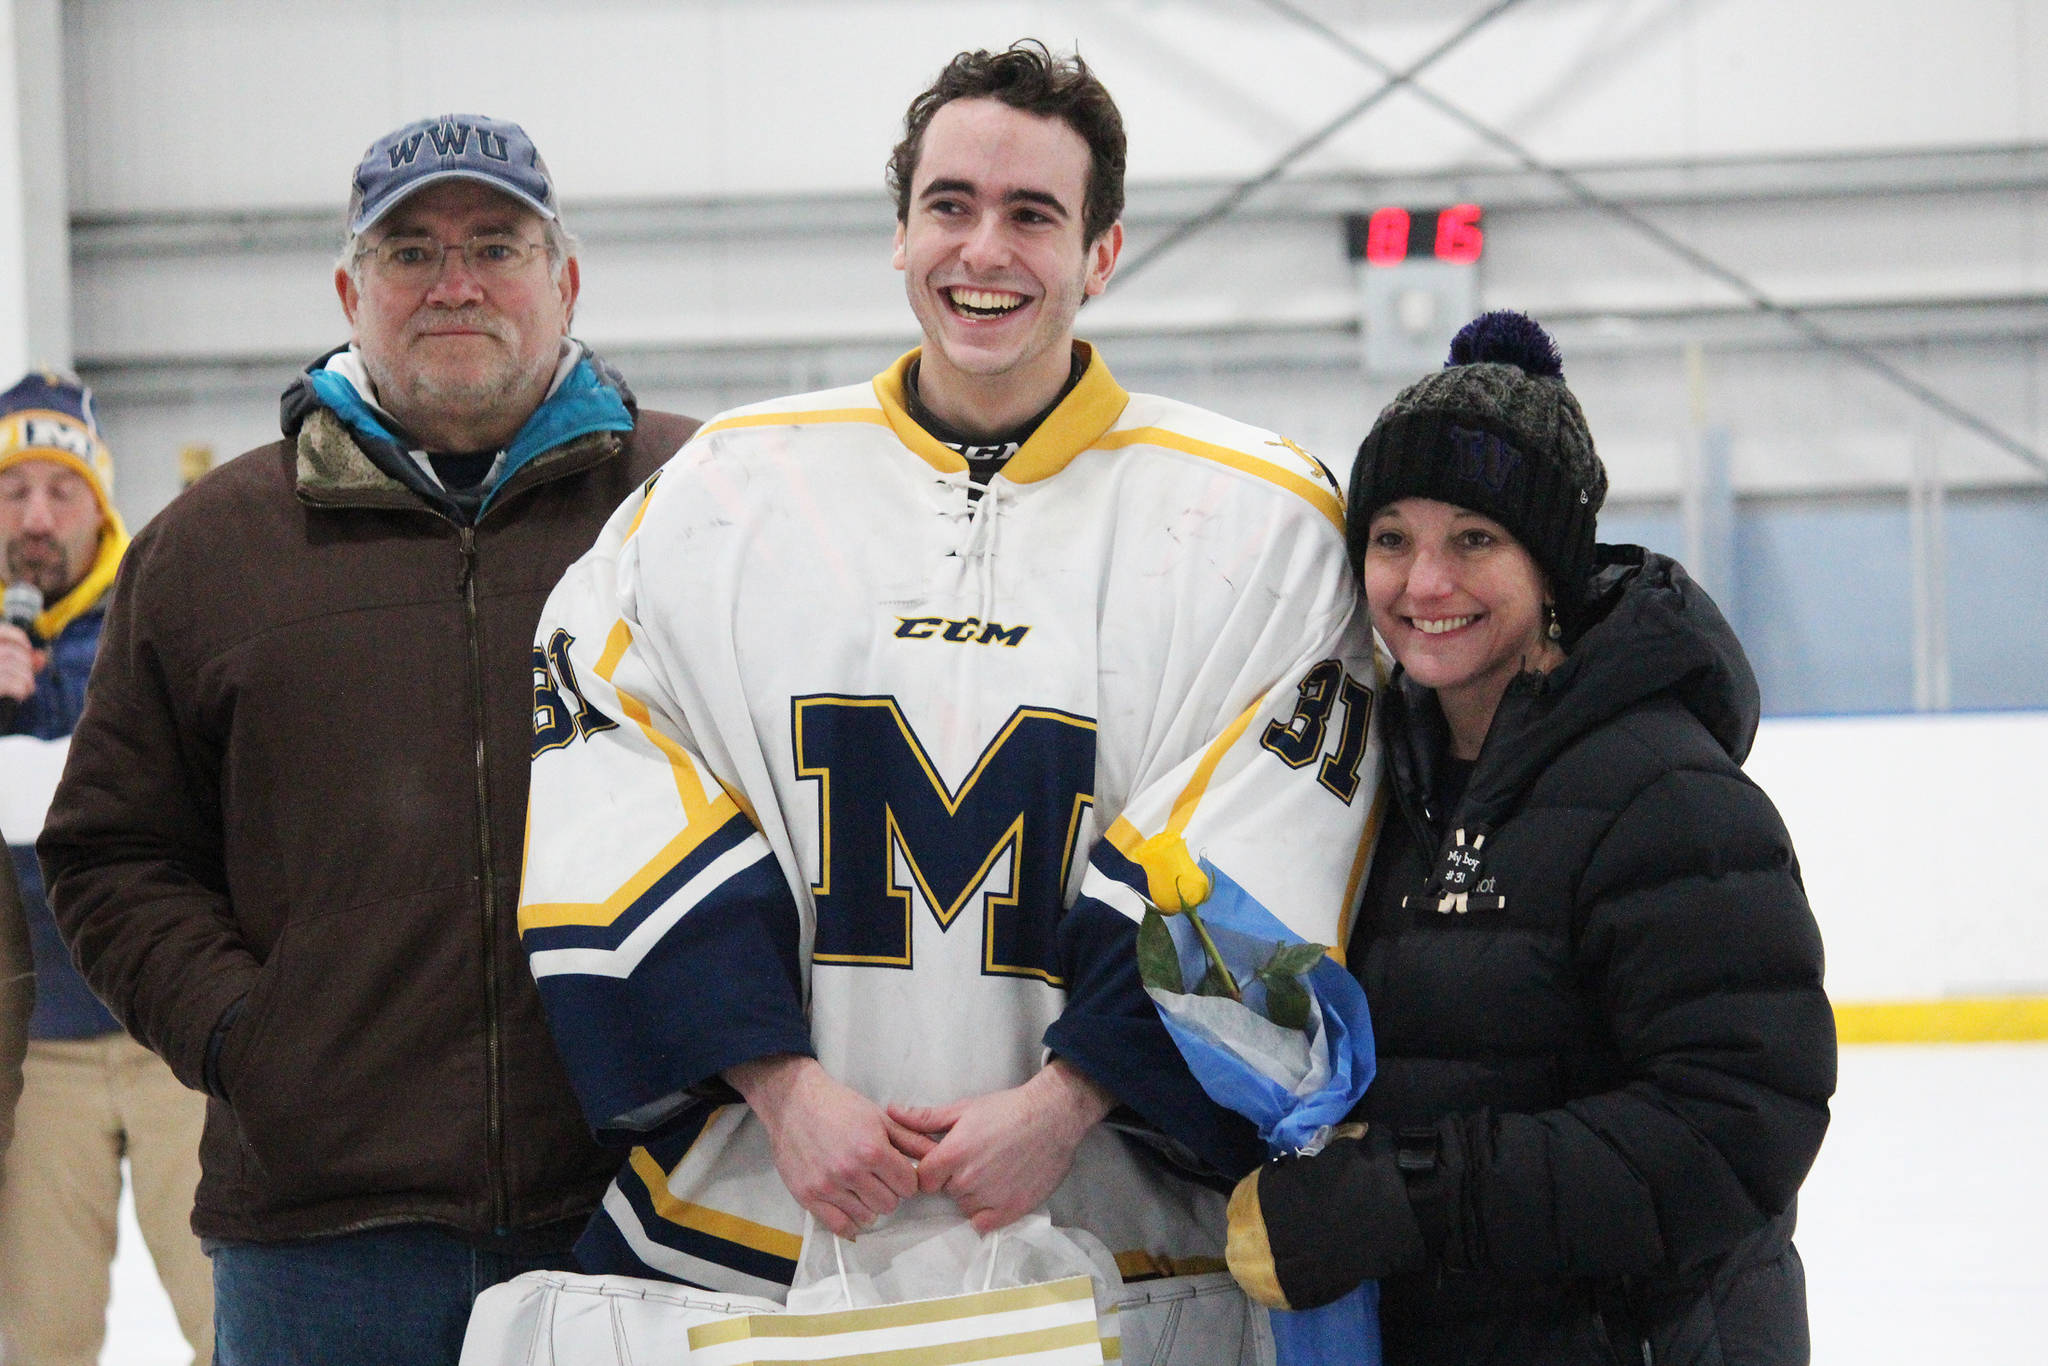 Homer senior Hunter Warren is honored with his parents on Senior Night for the Homer High School hockey team Thursday, Jan. 24, 2019 at Kevin Bell Ice Arena in Homer, Alaska. The Mariners defeated Houston High School 10-1. (Photo by Megan Pacer/Homer News)